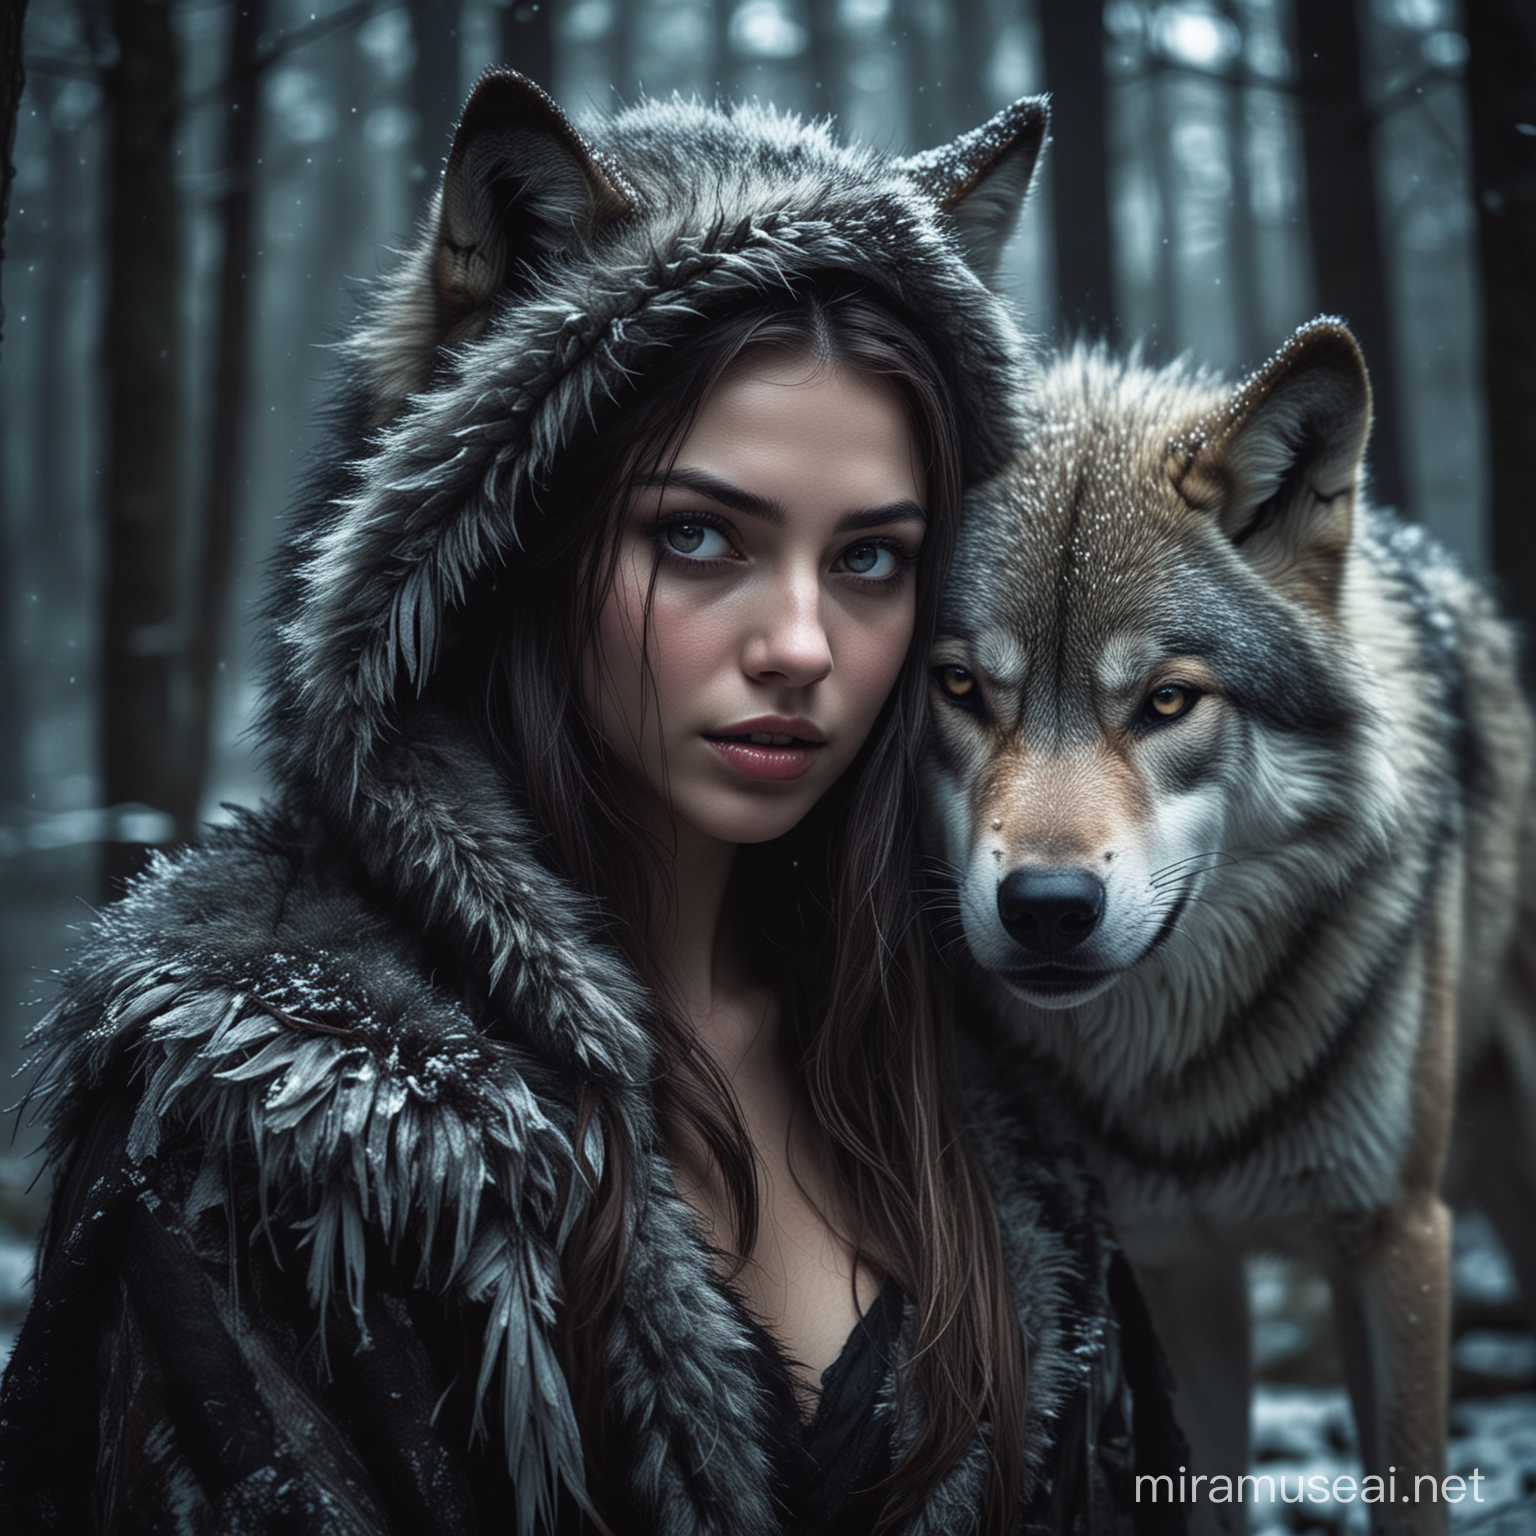 Enchanted Encounter Fantasy Girl Confronts Wolf in Dark Forest